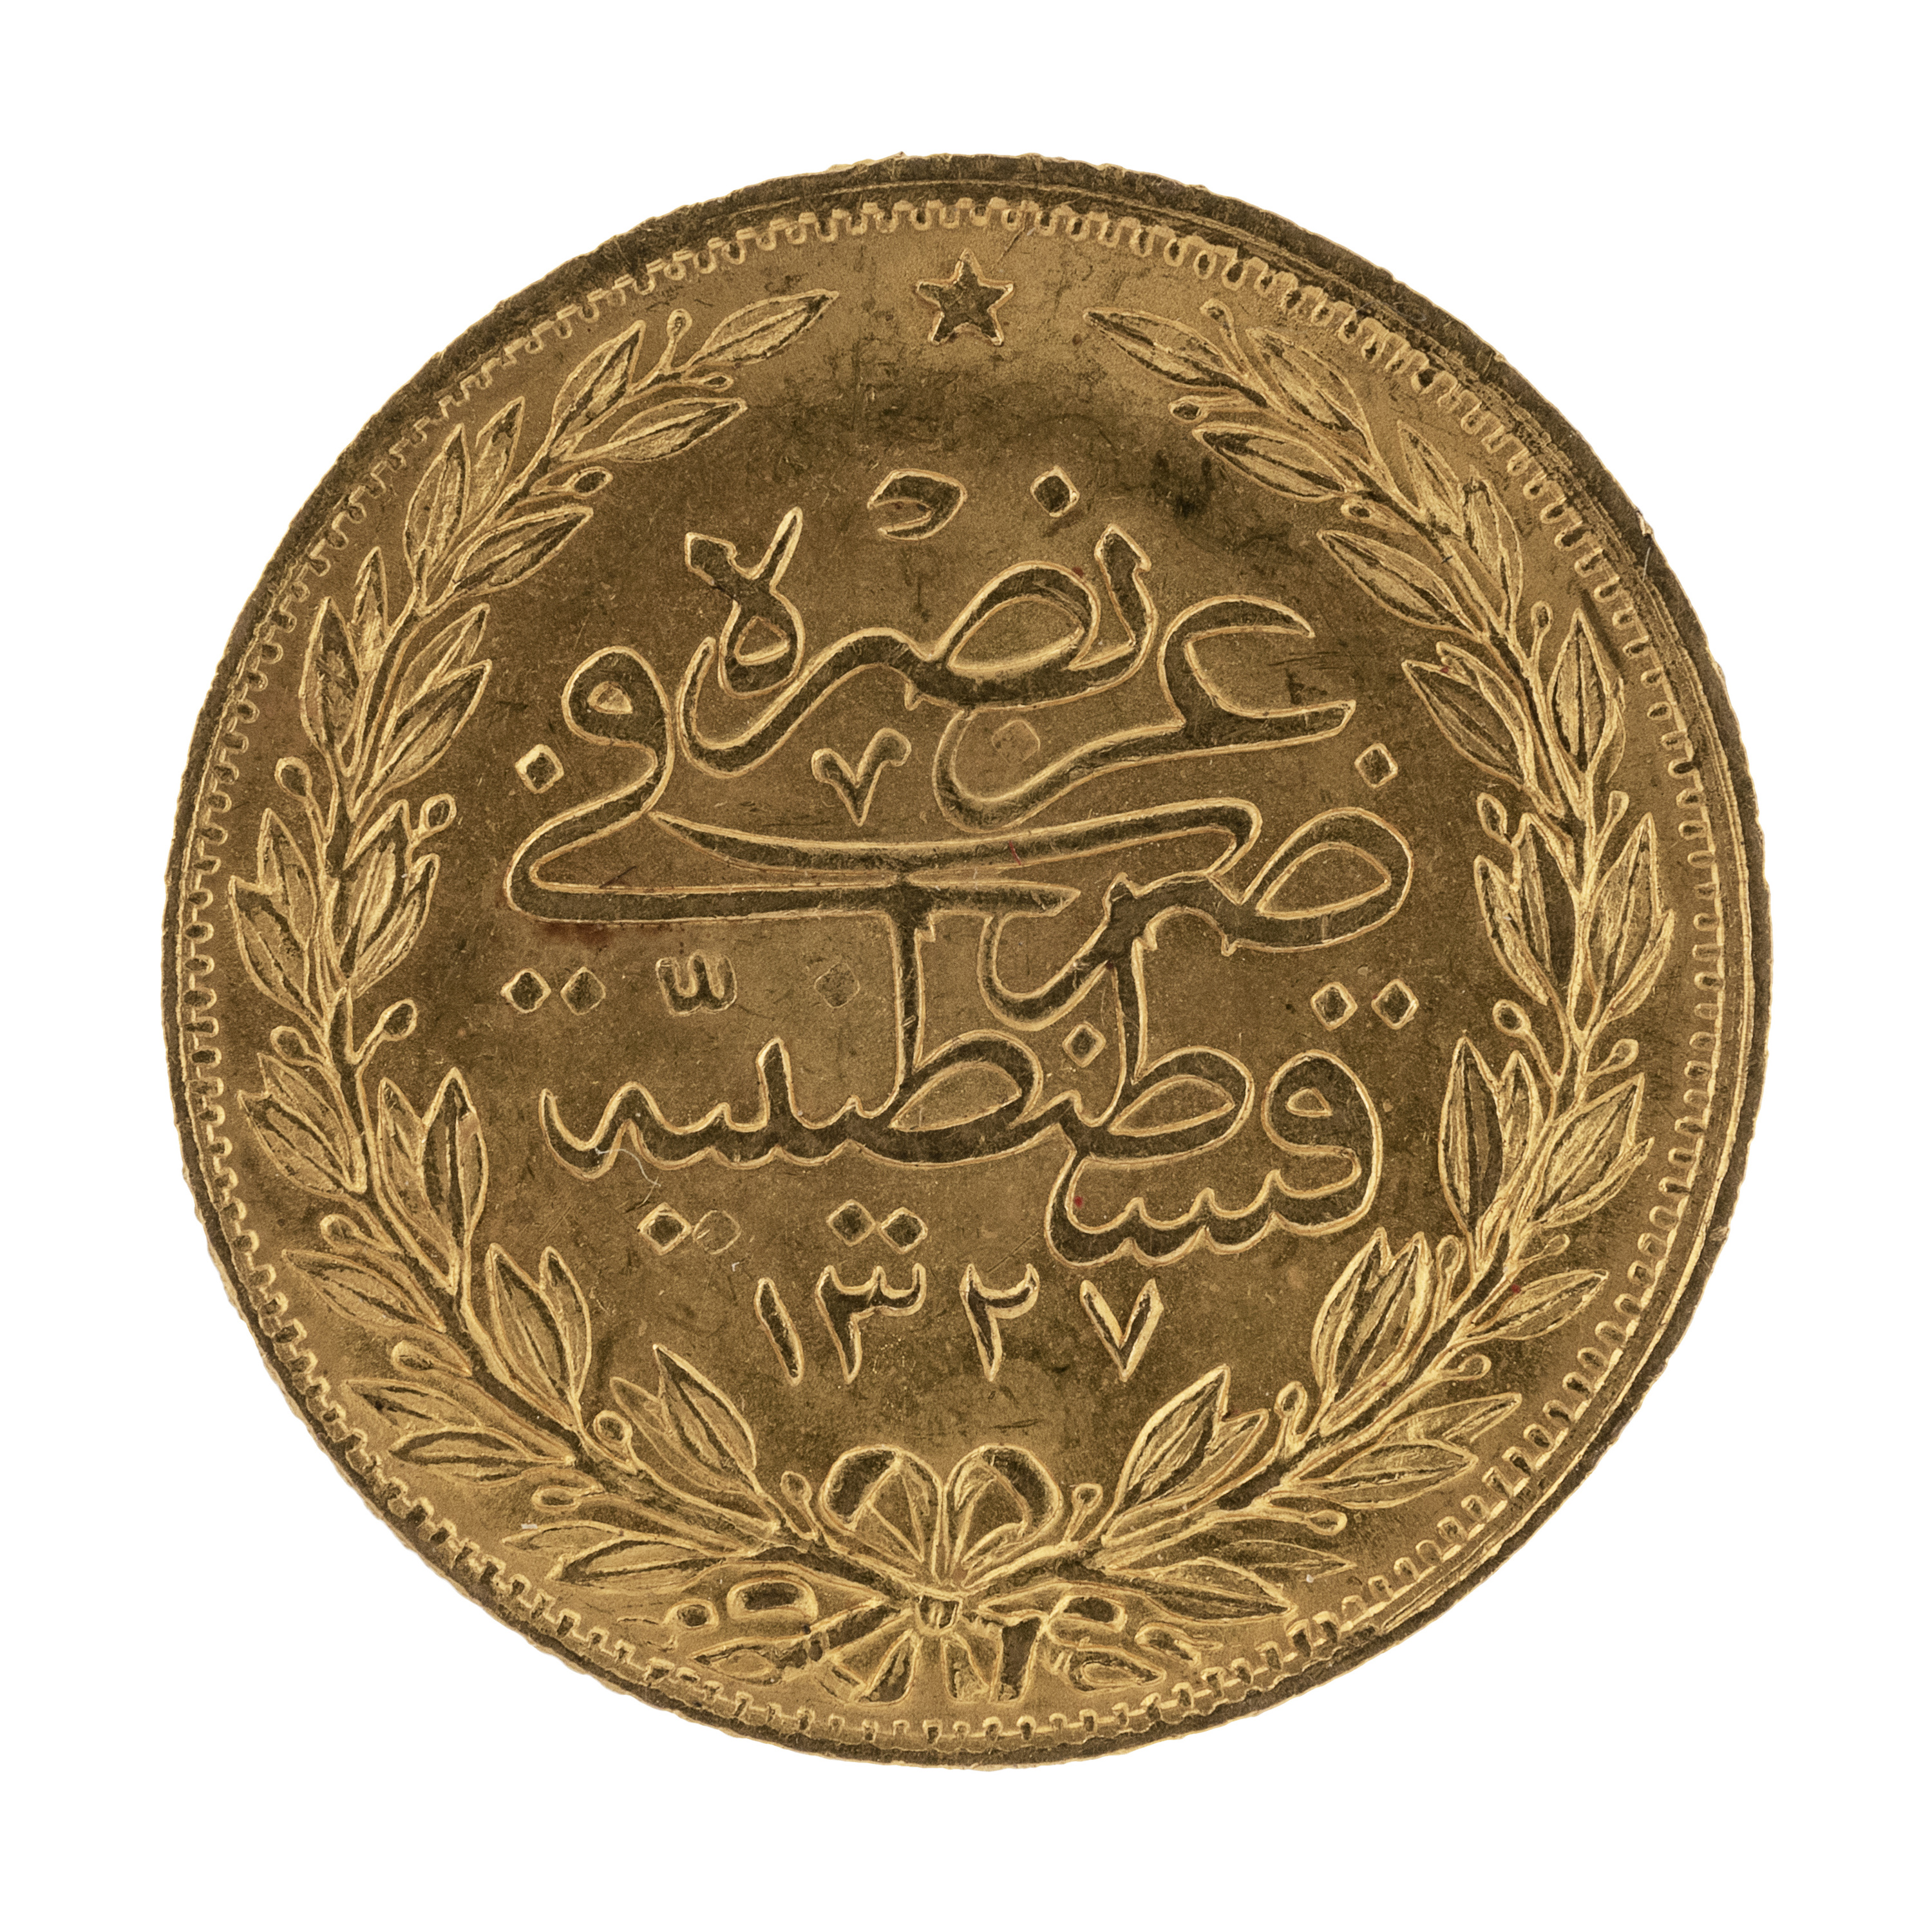 GOLD COIN TURKEY EARLY 20TH CENTURY - Image 2 of 2